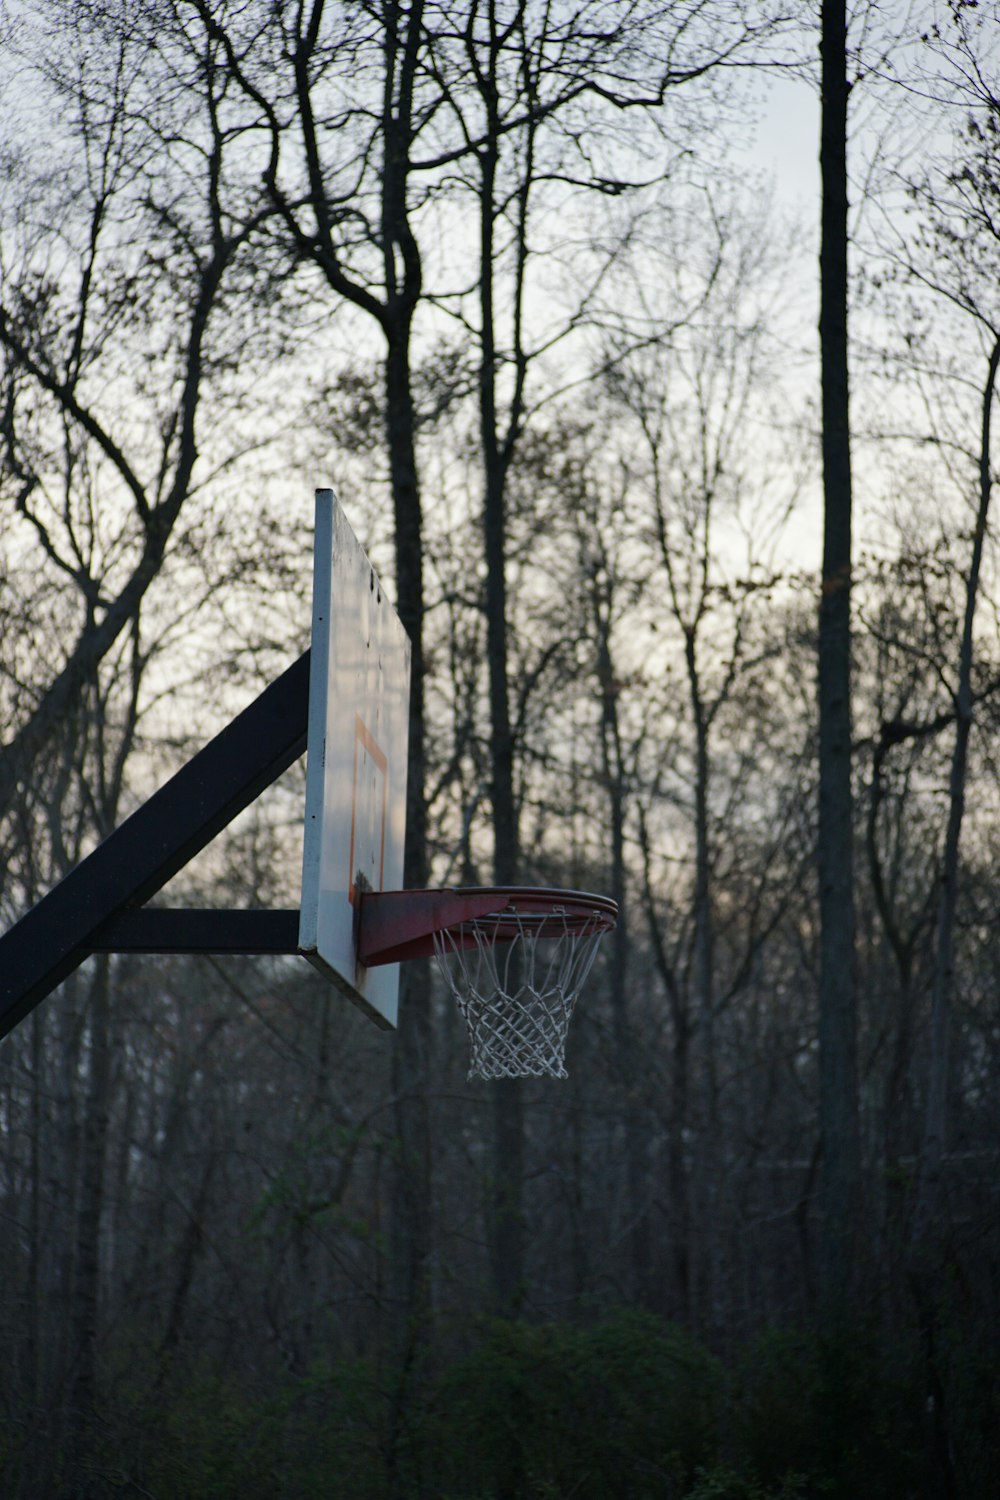 a basketball hoop in a wooded area with trees in the background